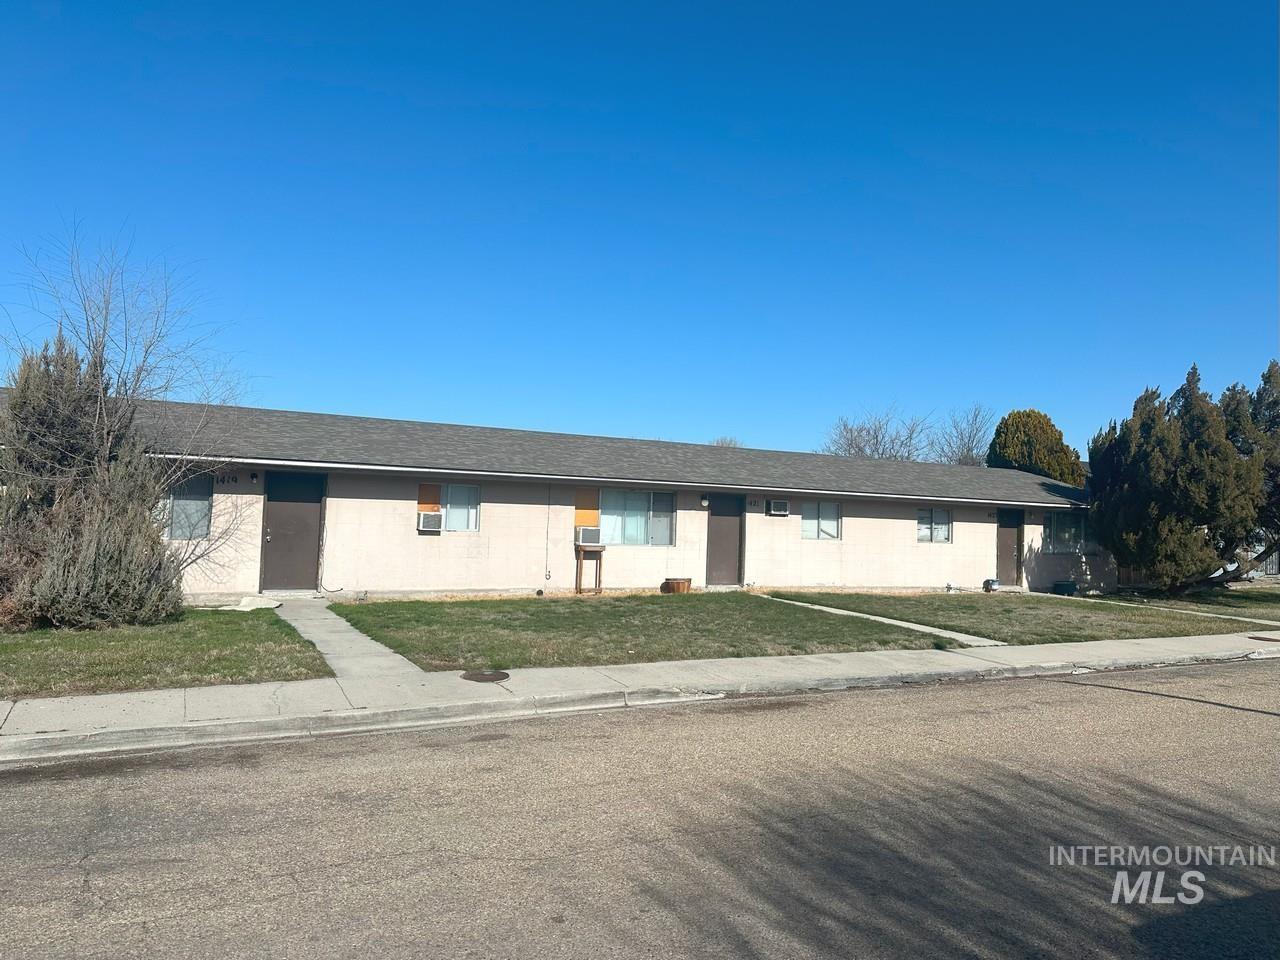 1413/1419 Missoula Way, Caldwell, Idaho 83605-6396, 2 Bedrooms, 1.5 Bathrooms, Residential Income For Sale, Price $1,105,000,MLS 98902606